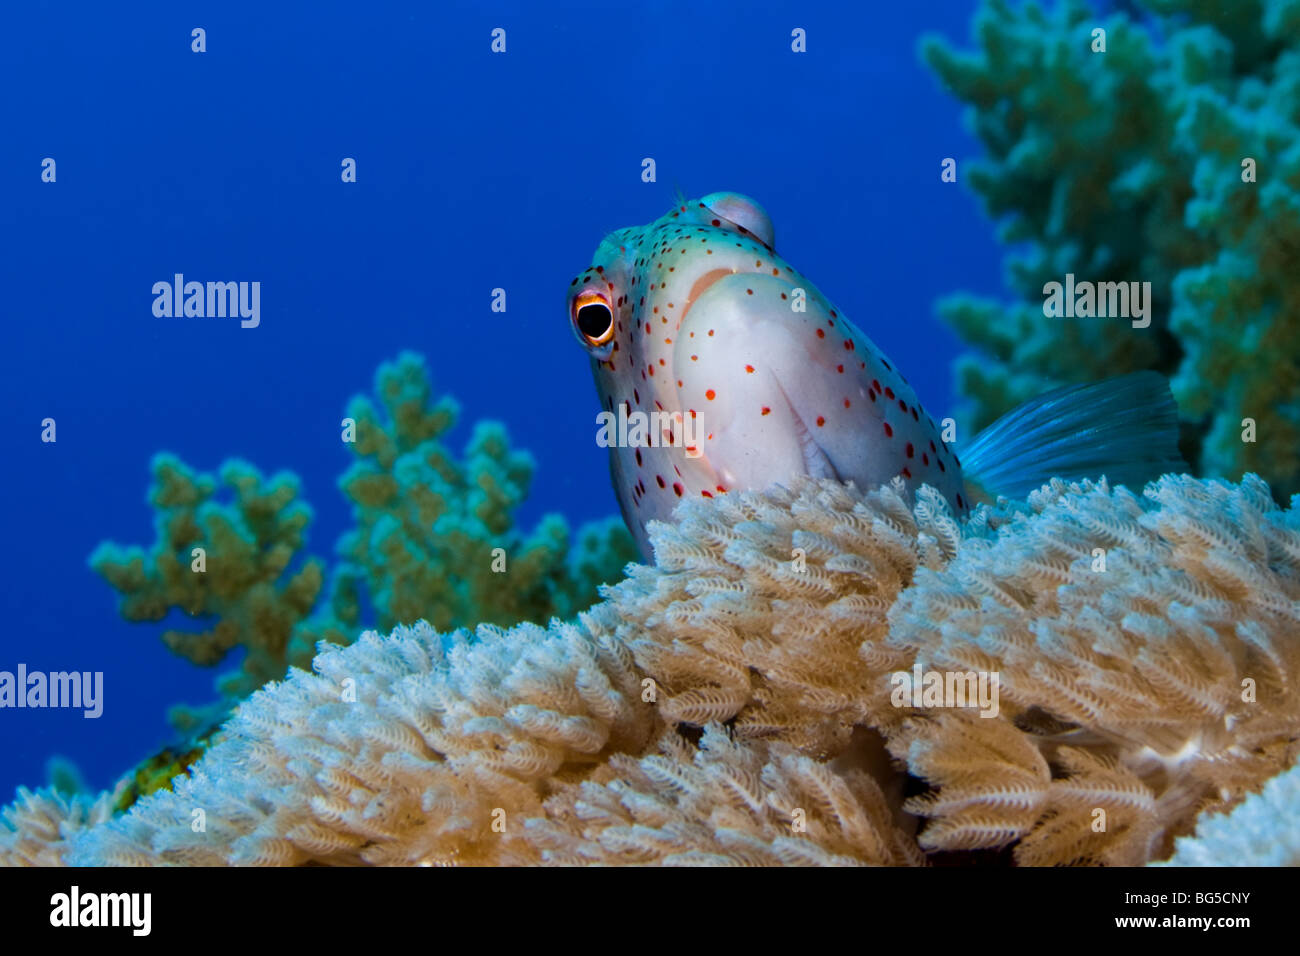 Red Sea coral reefs, Ras Mohammed, national park, goby fish, coral reef, tropical reef, blue water, ocean, sea, scuba, diving Stock Photo